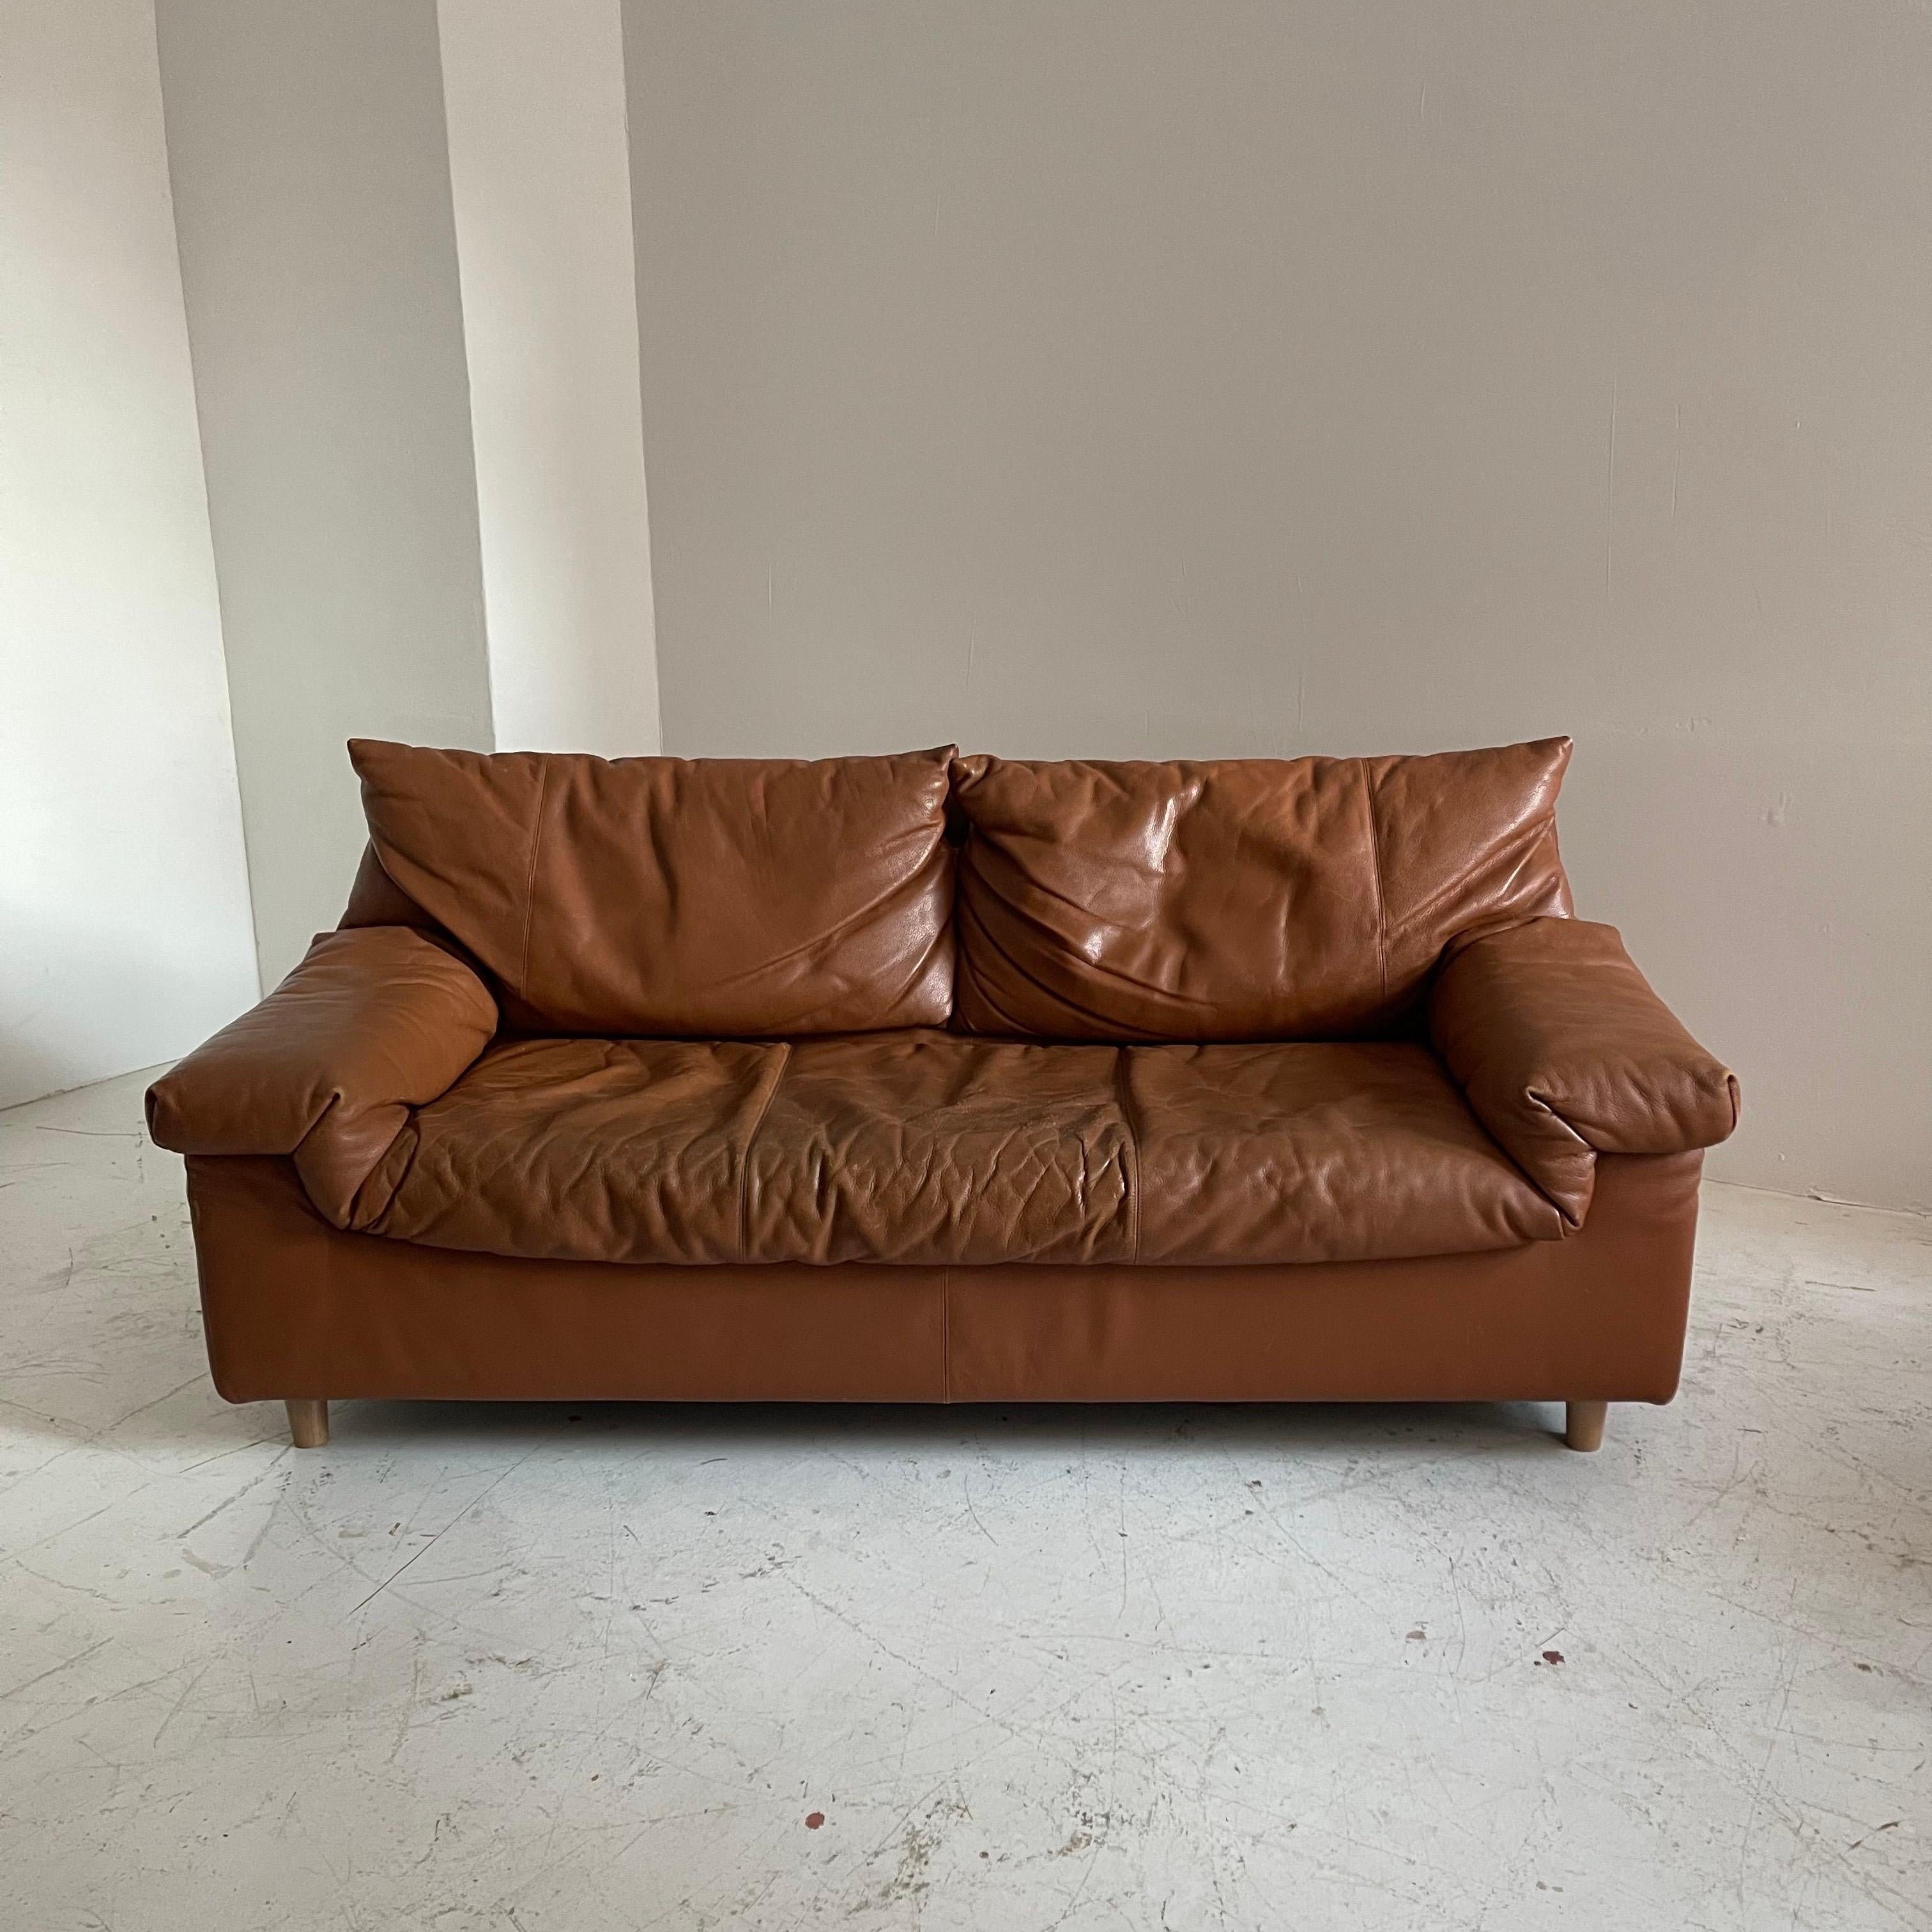 Vintage patinated Cognac leather three seater sofa by Cinna, France, 1970. Color is a dark cognac, burnt orange.